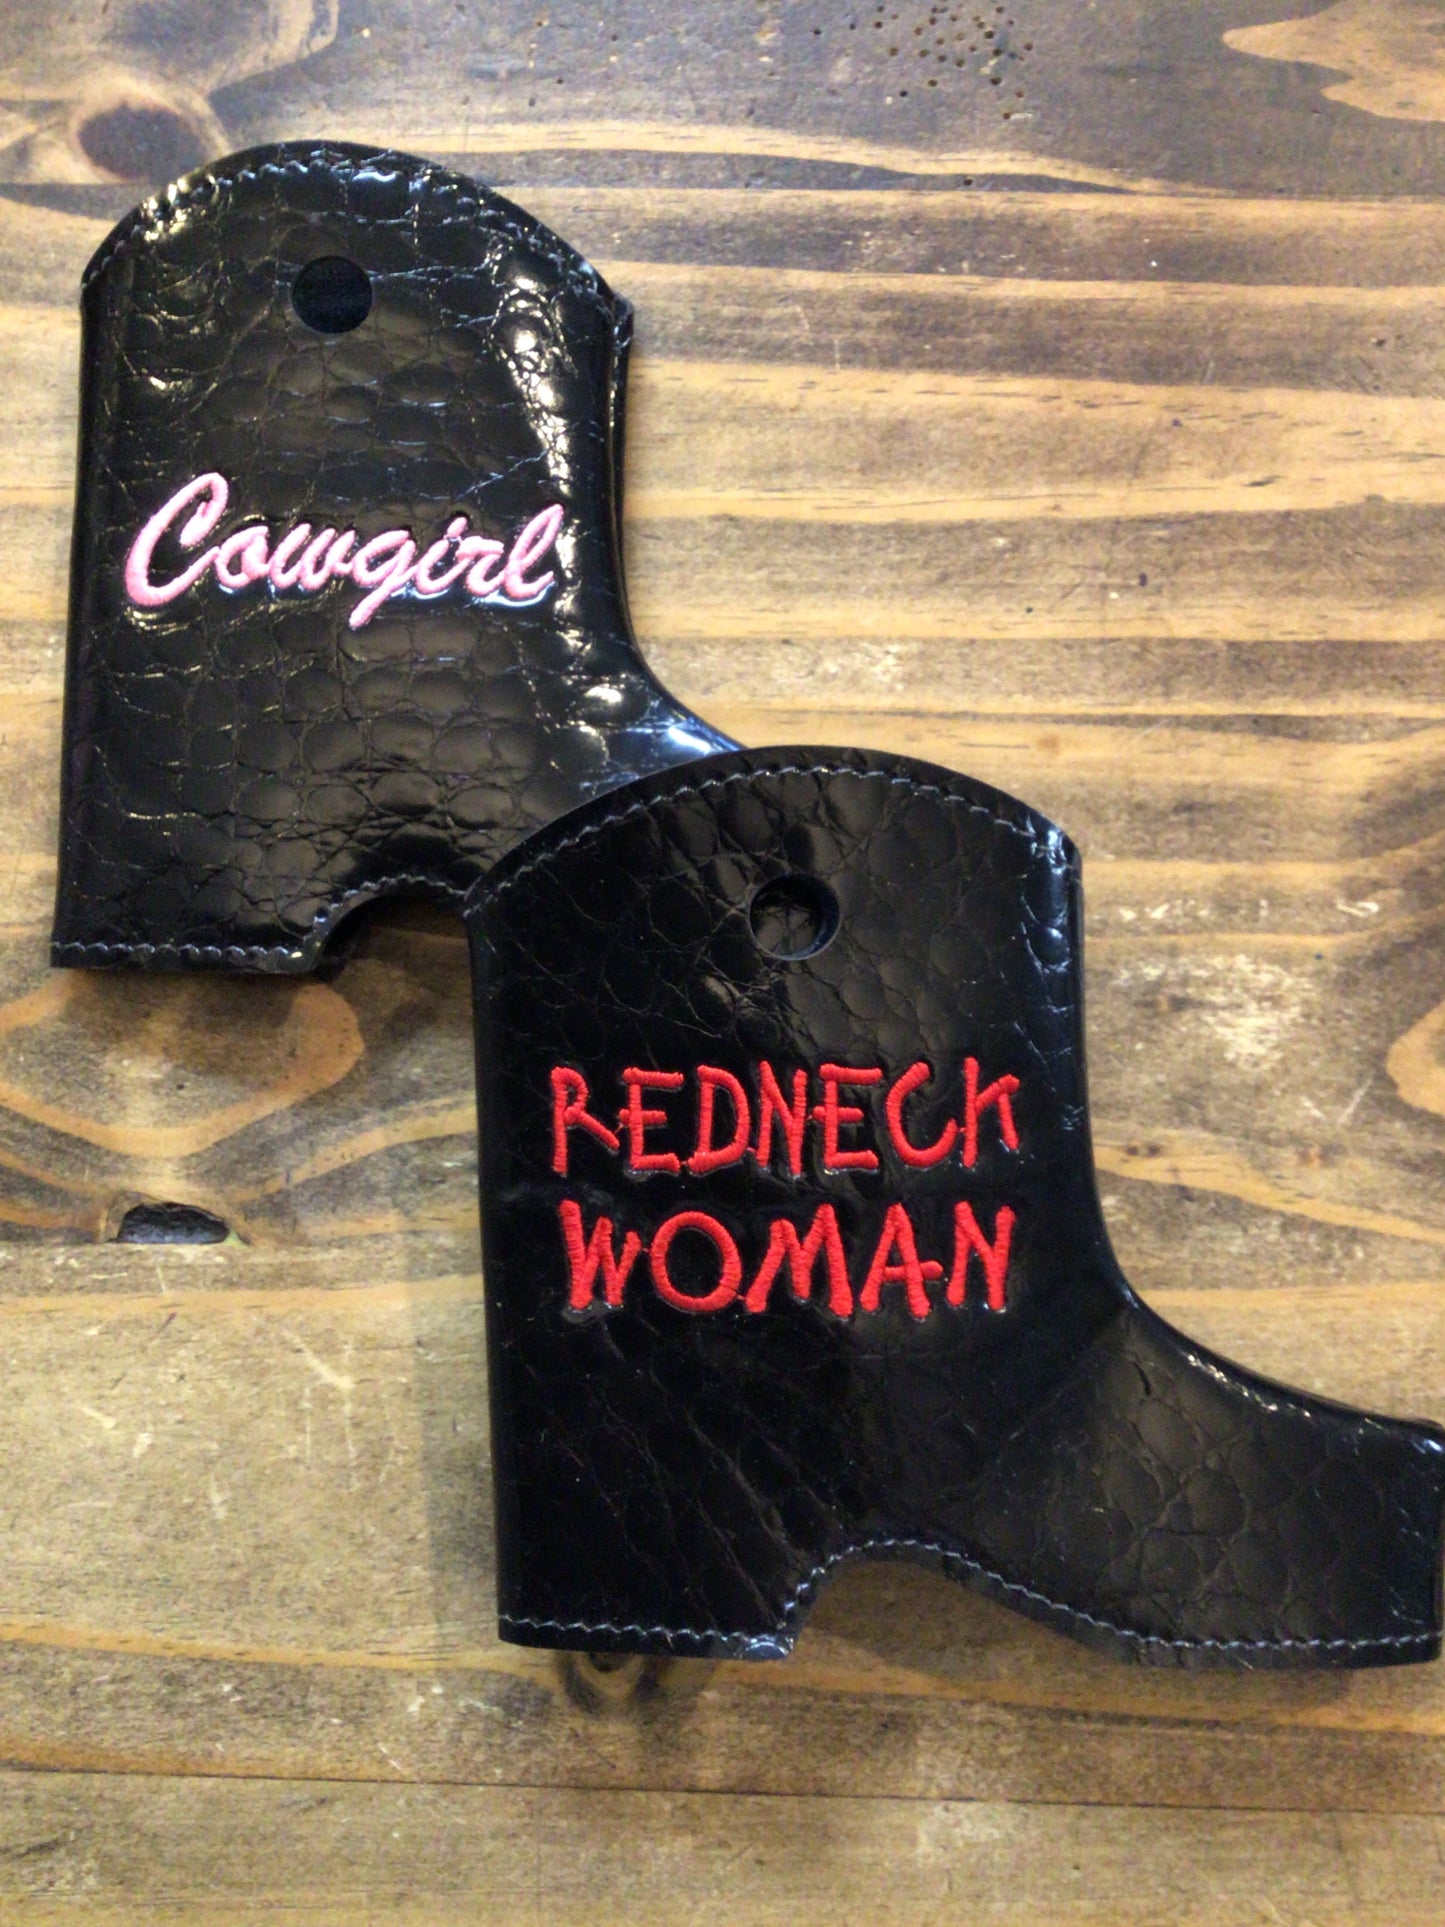 Cowgirl Boot Bottle Coozie